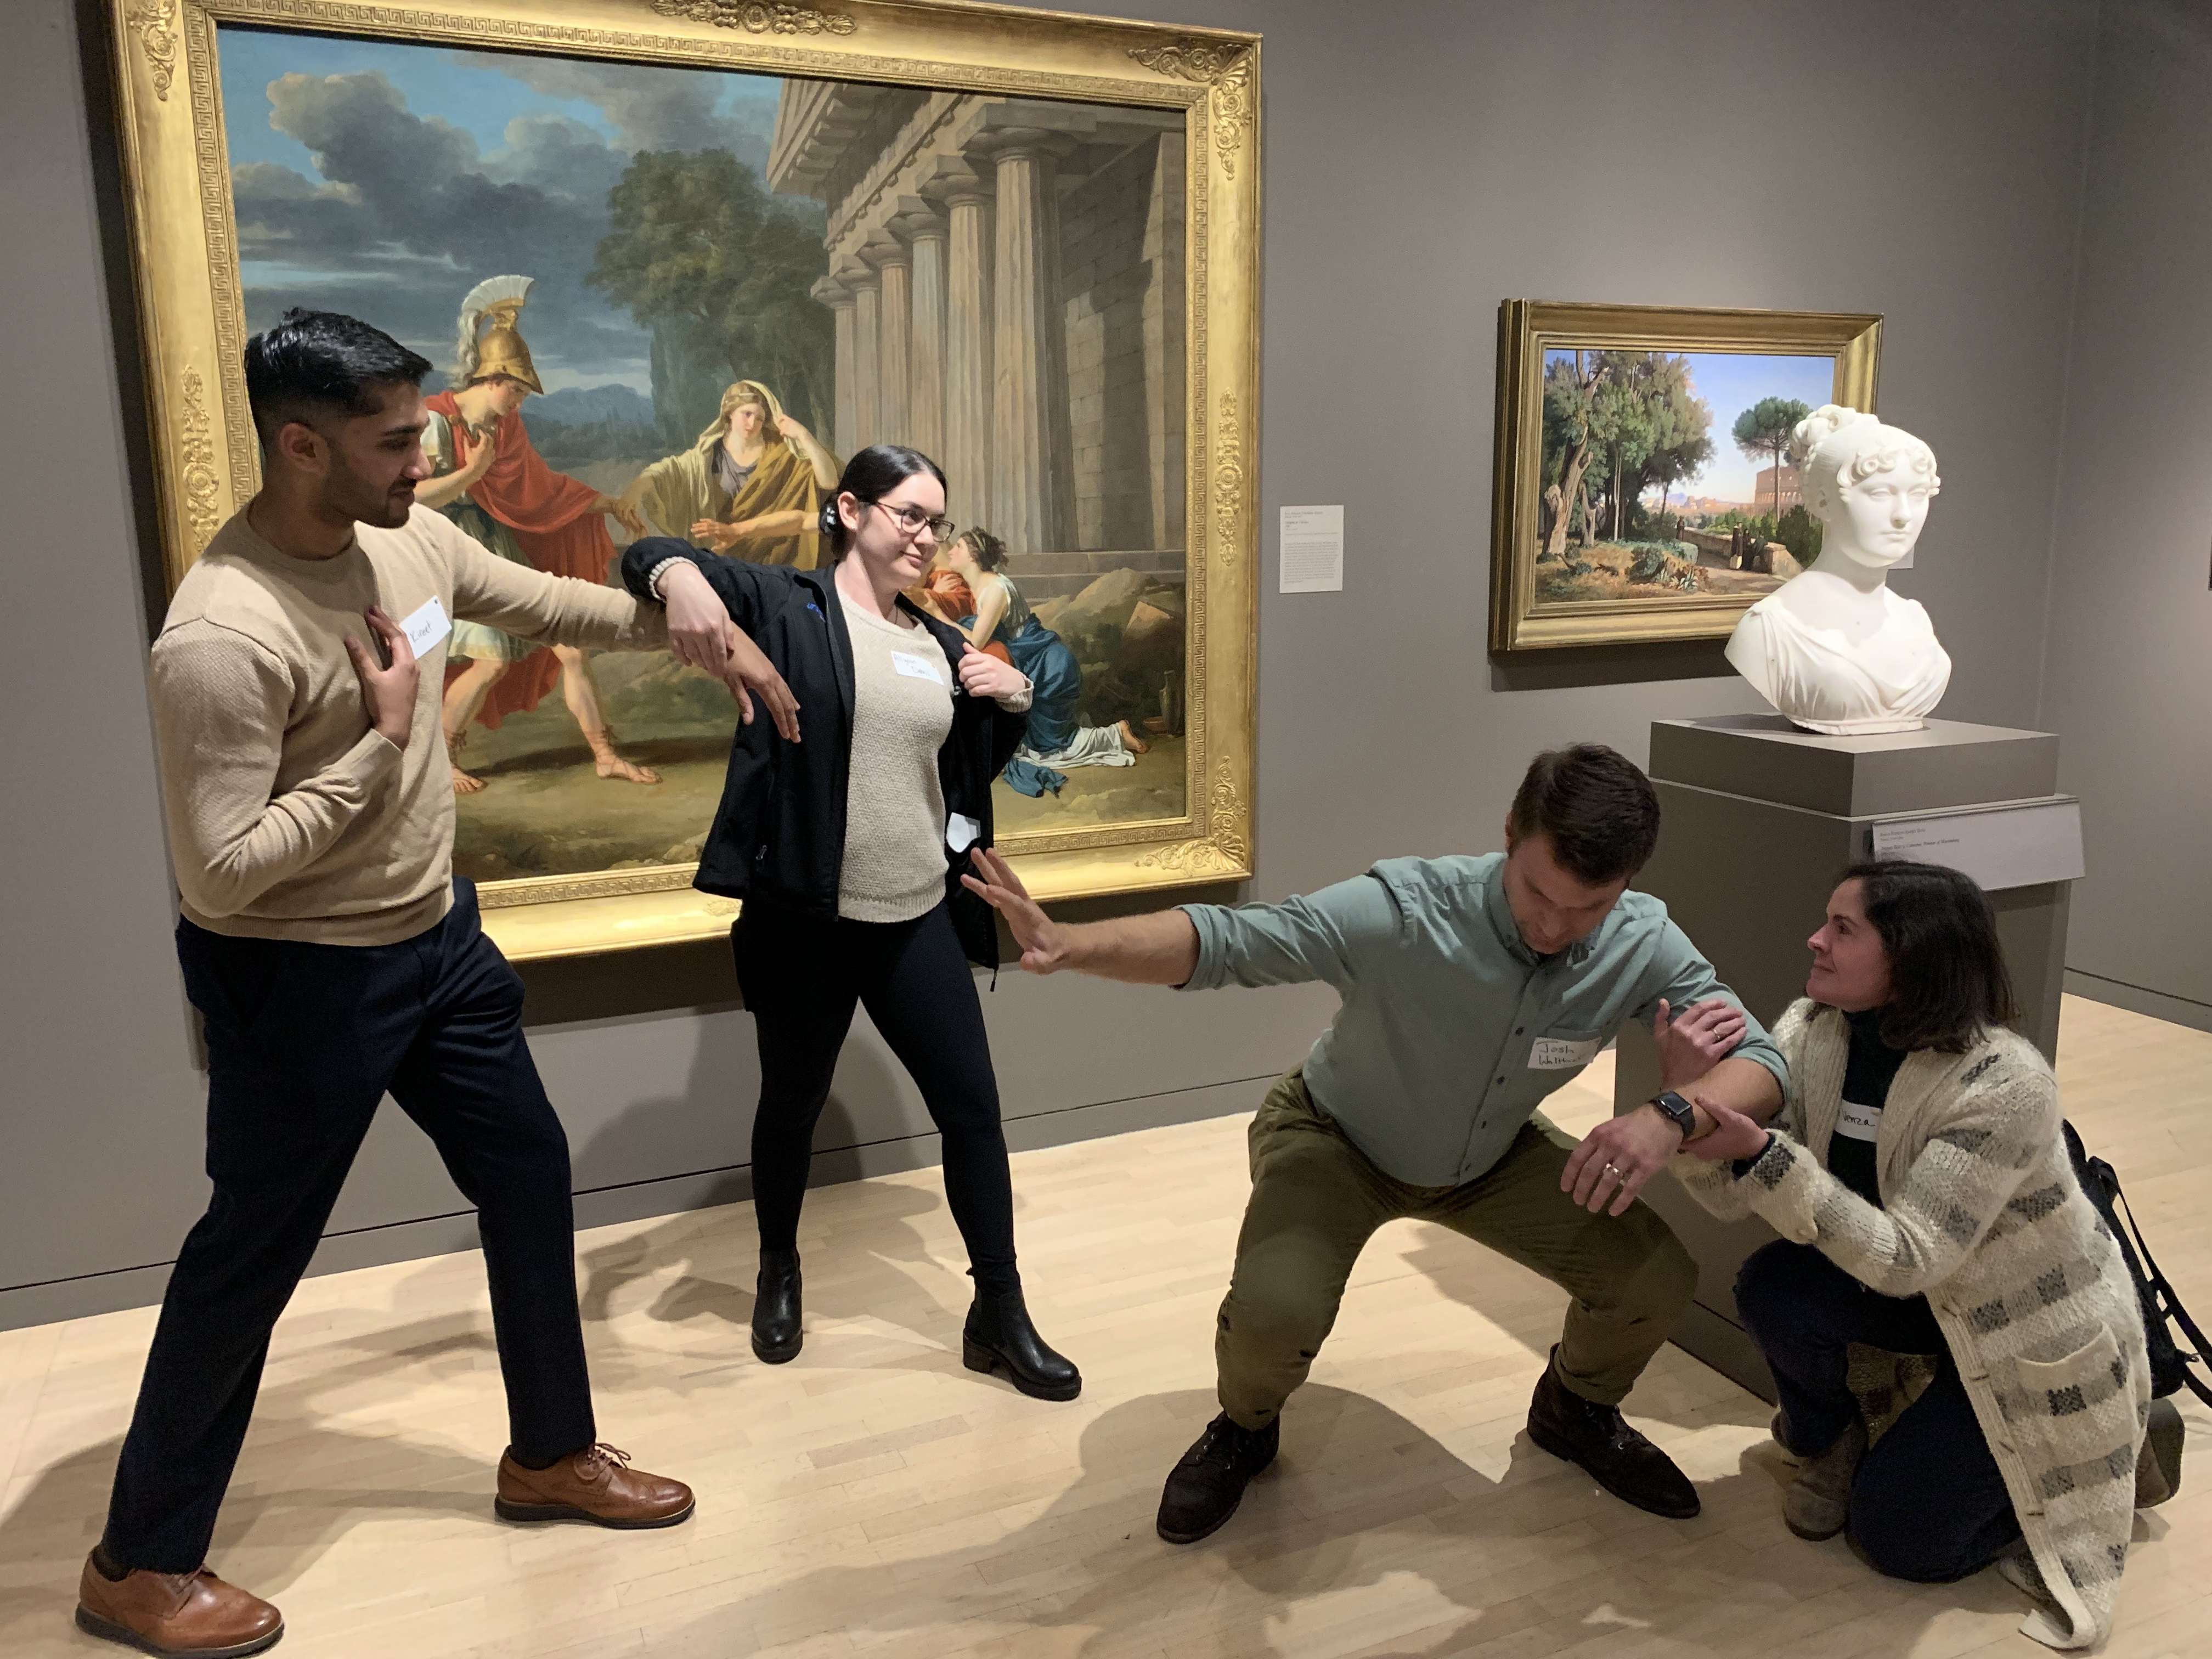 Psychiatry residents acting out the scene of Oedipus at Colonus at Dallas Art Museum